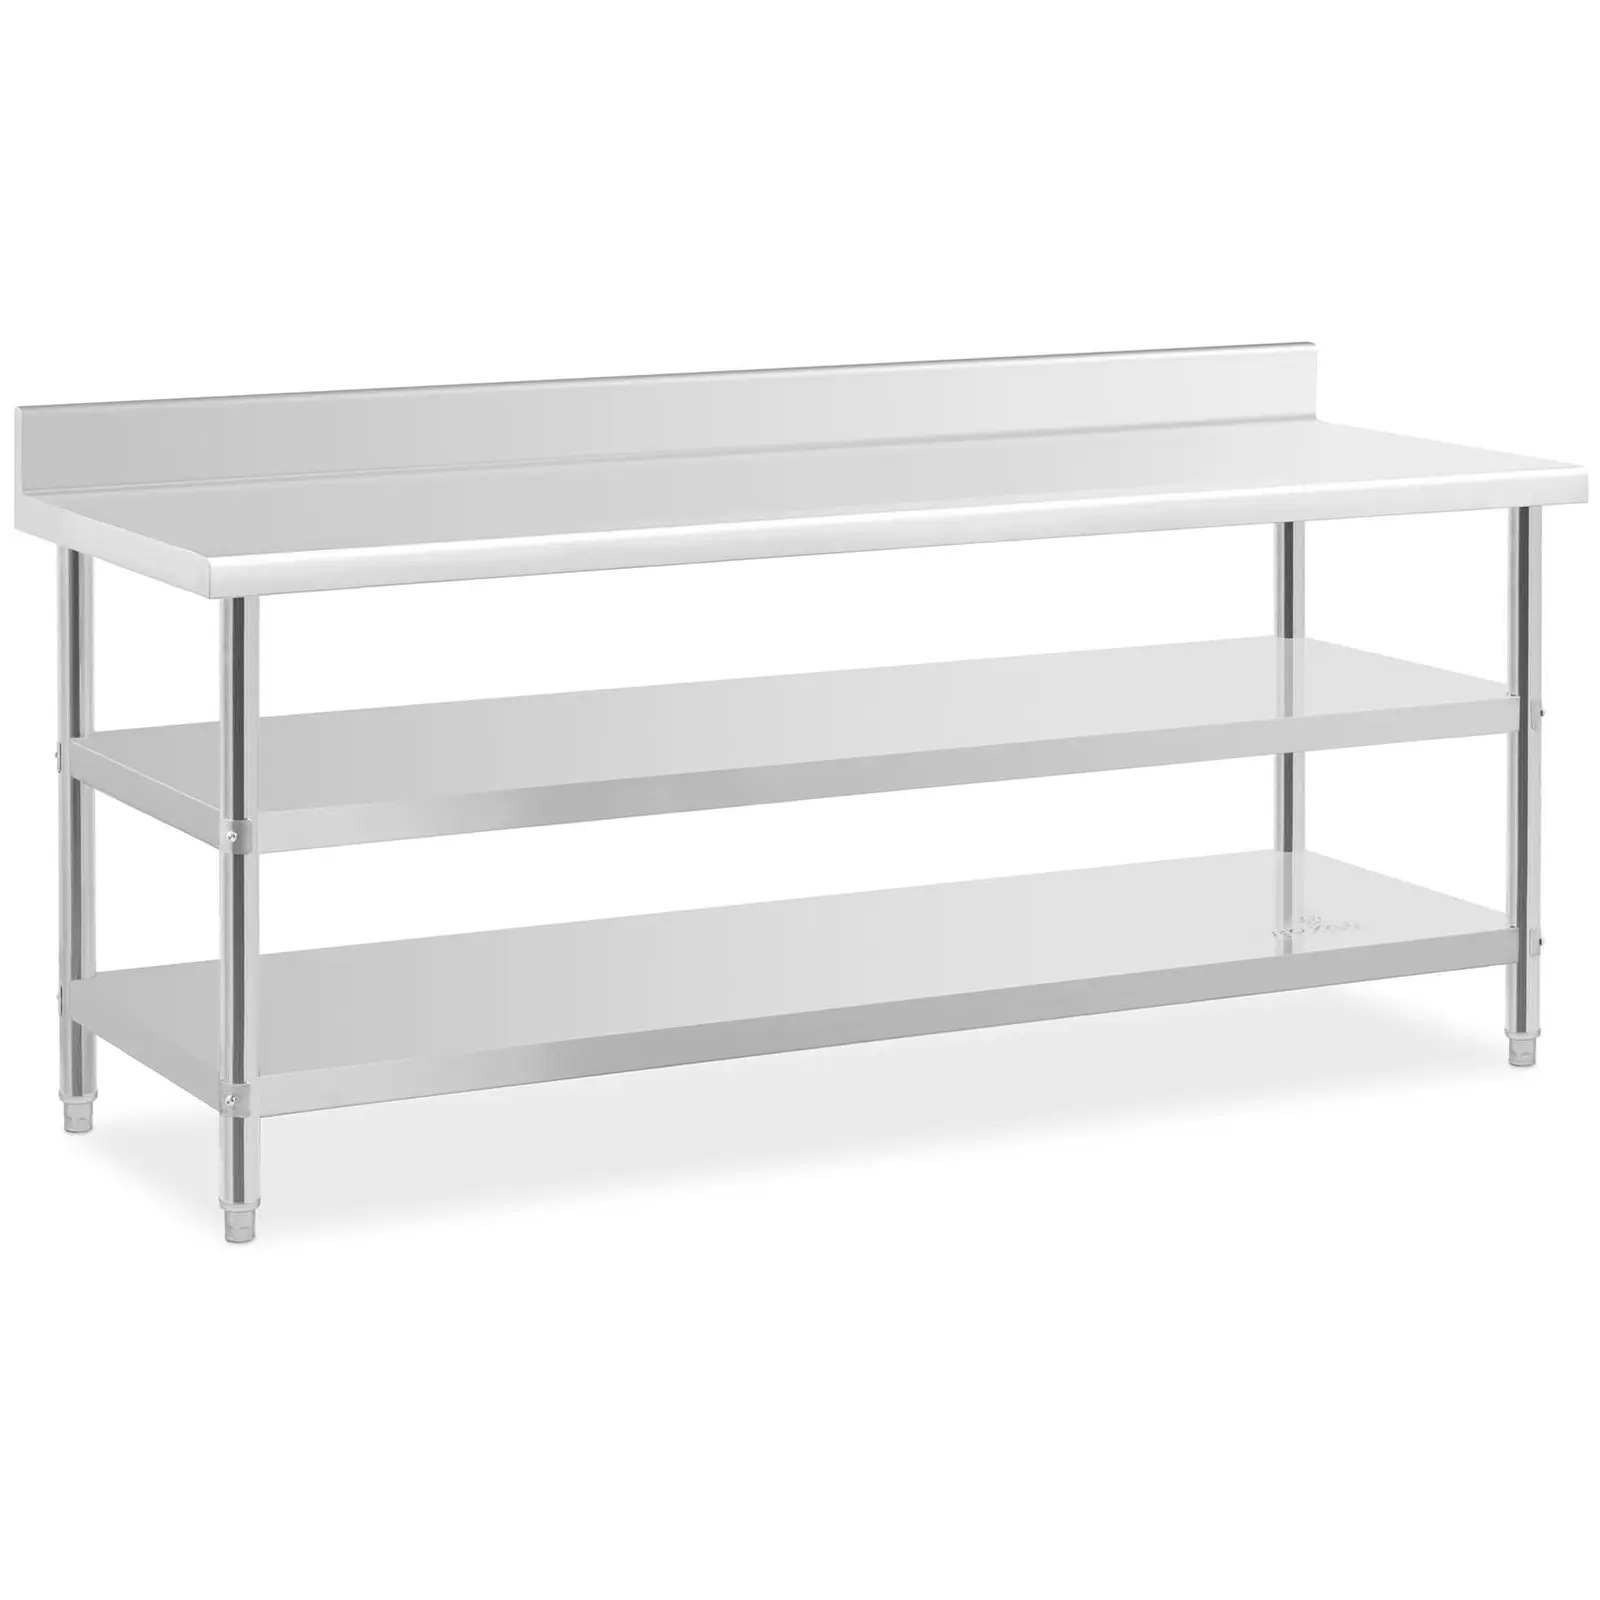 Stainless Steel Work Table with upstand - 200 x 70 x 16.5 cm - 235 kg - 2 shelves - Royal Catering